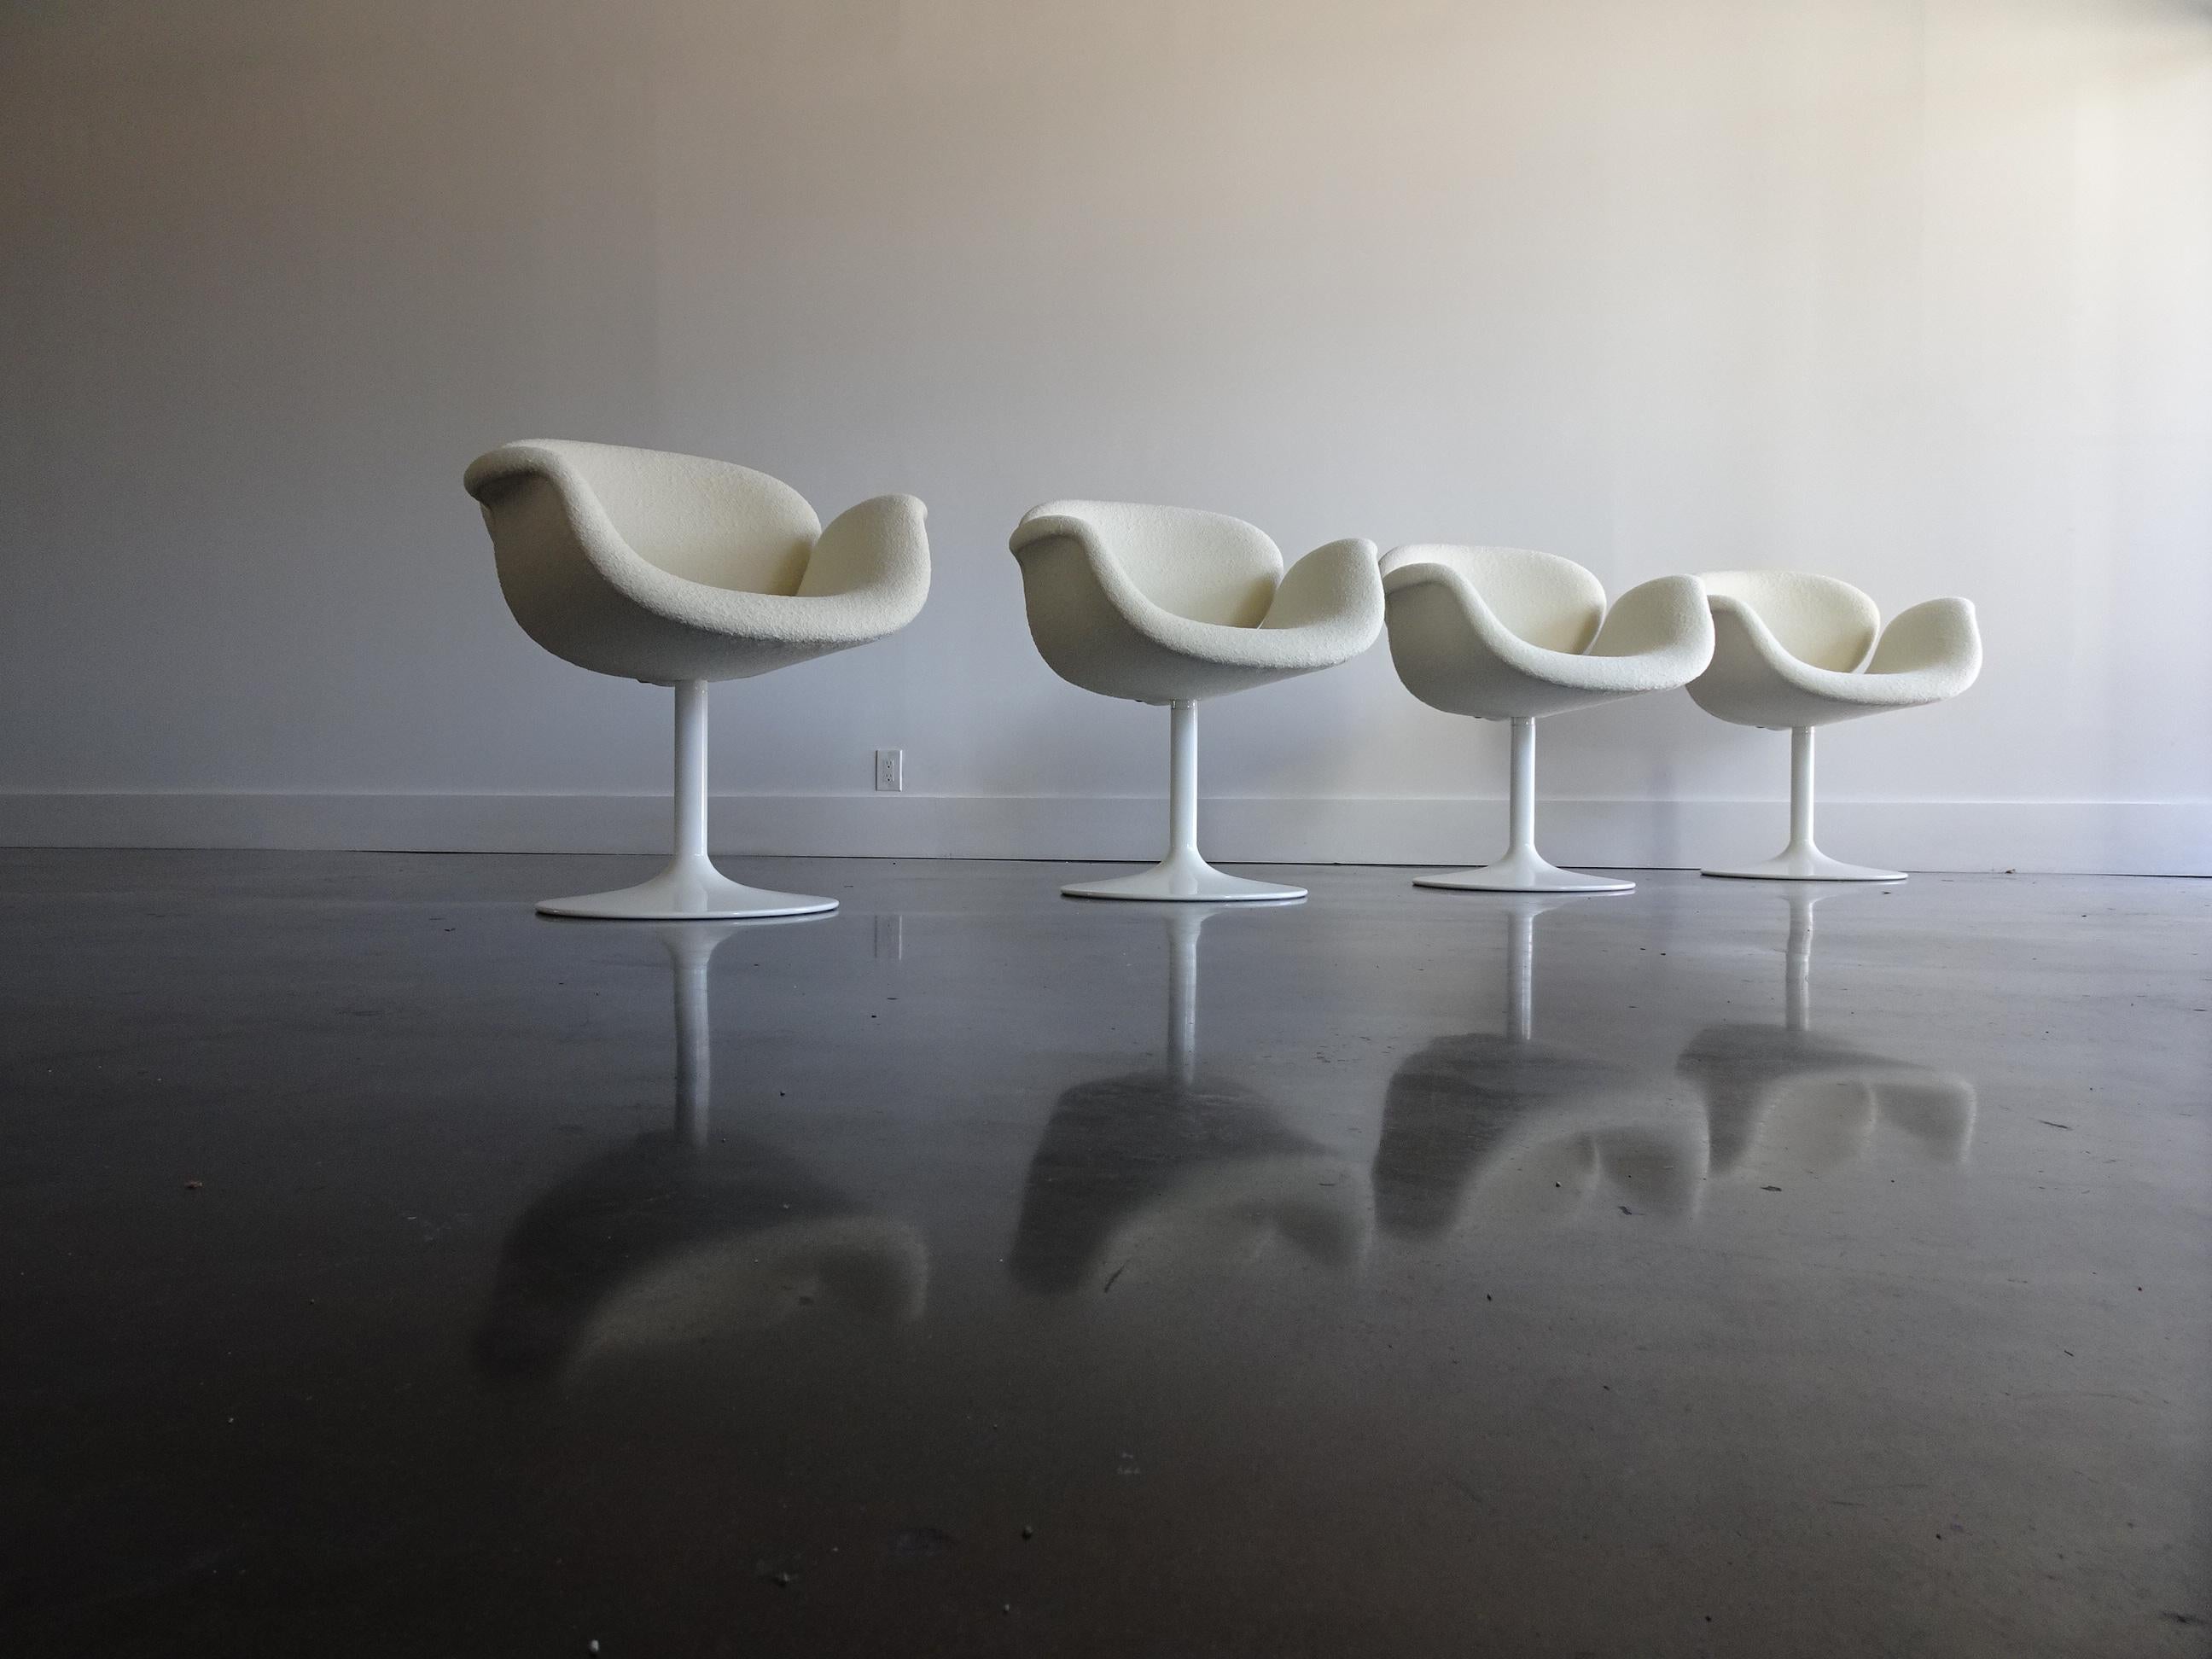 We offer 4 Mid-Century Modern designed by Pierre Paulin swivel tulip armchairs in Knoll white Bouclé fabric and made by Artifort.
Sandblasted and powder-coated steel cast base in white enamel.
All chairs are marked Artifort which is now under the